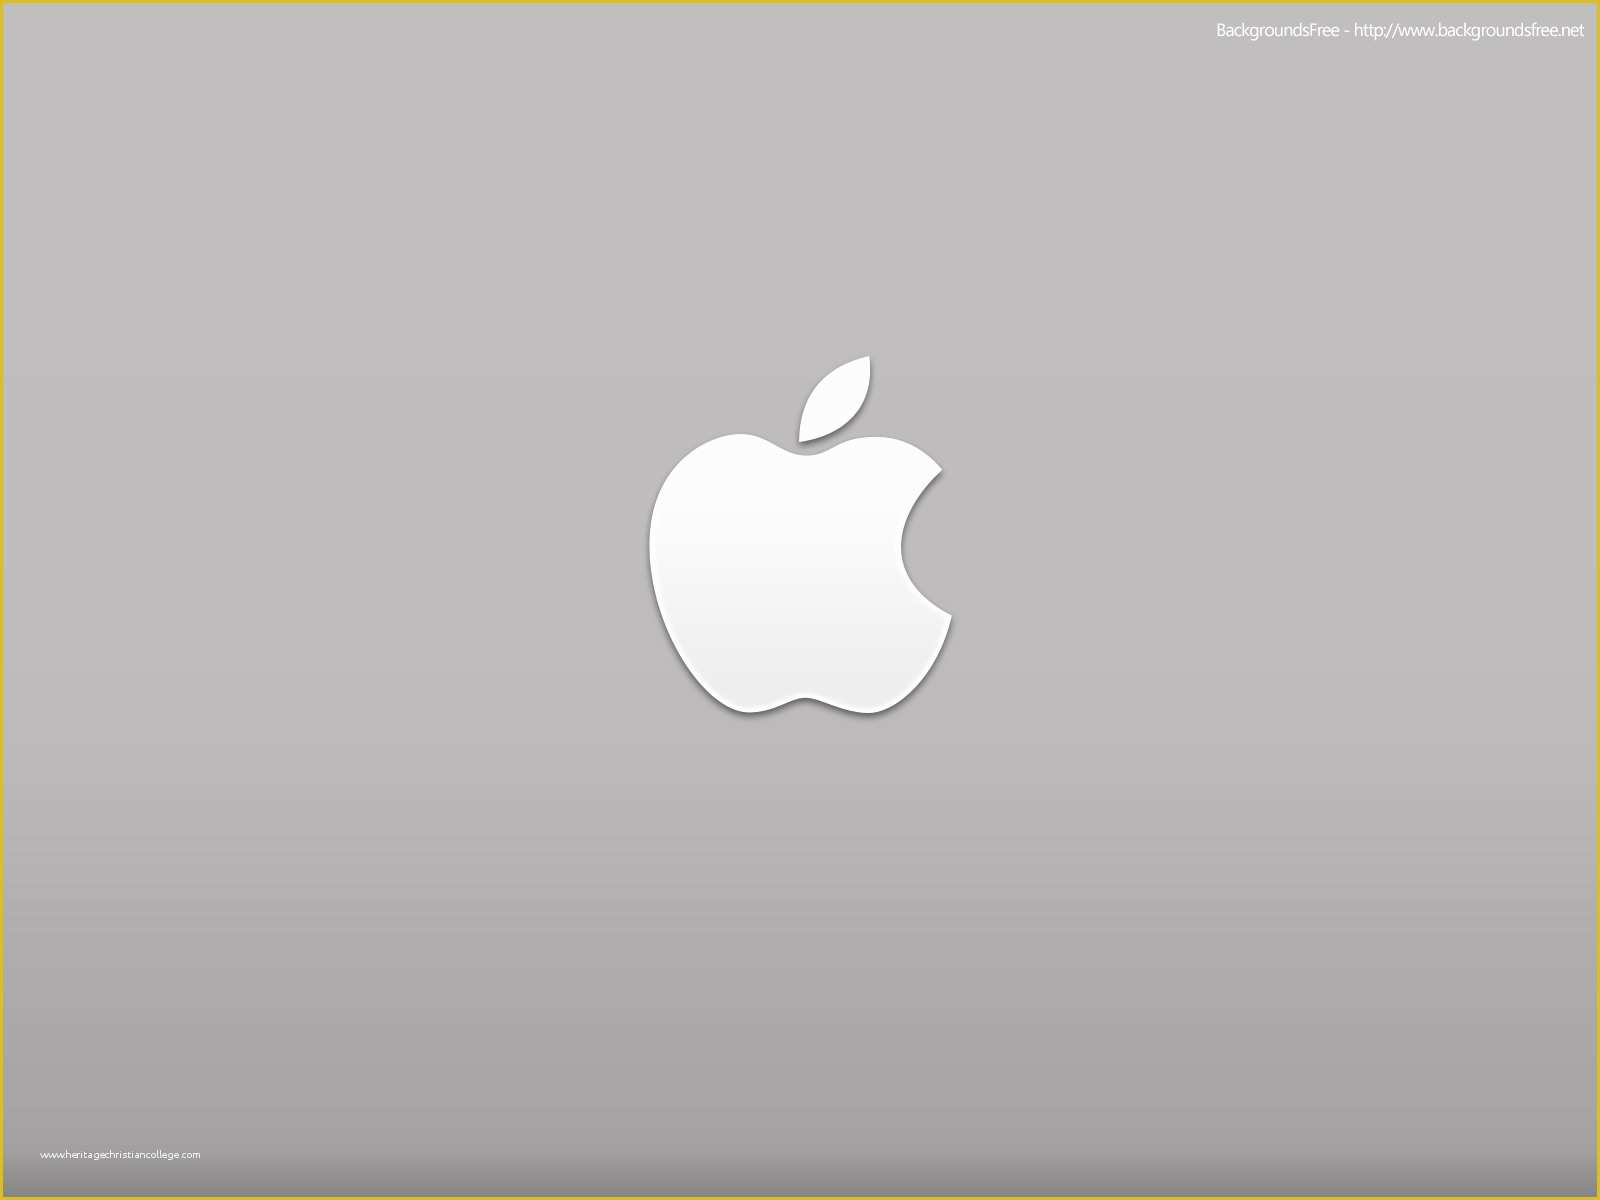 Free Powerpoint Templates for Mac Of Apple Desktop Logo Backgrounds